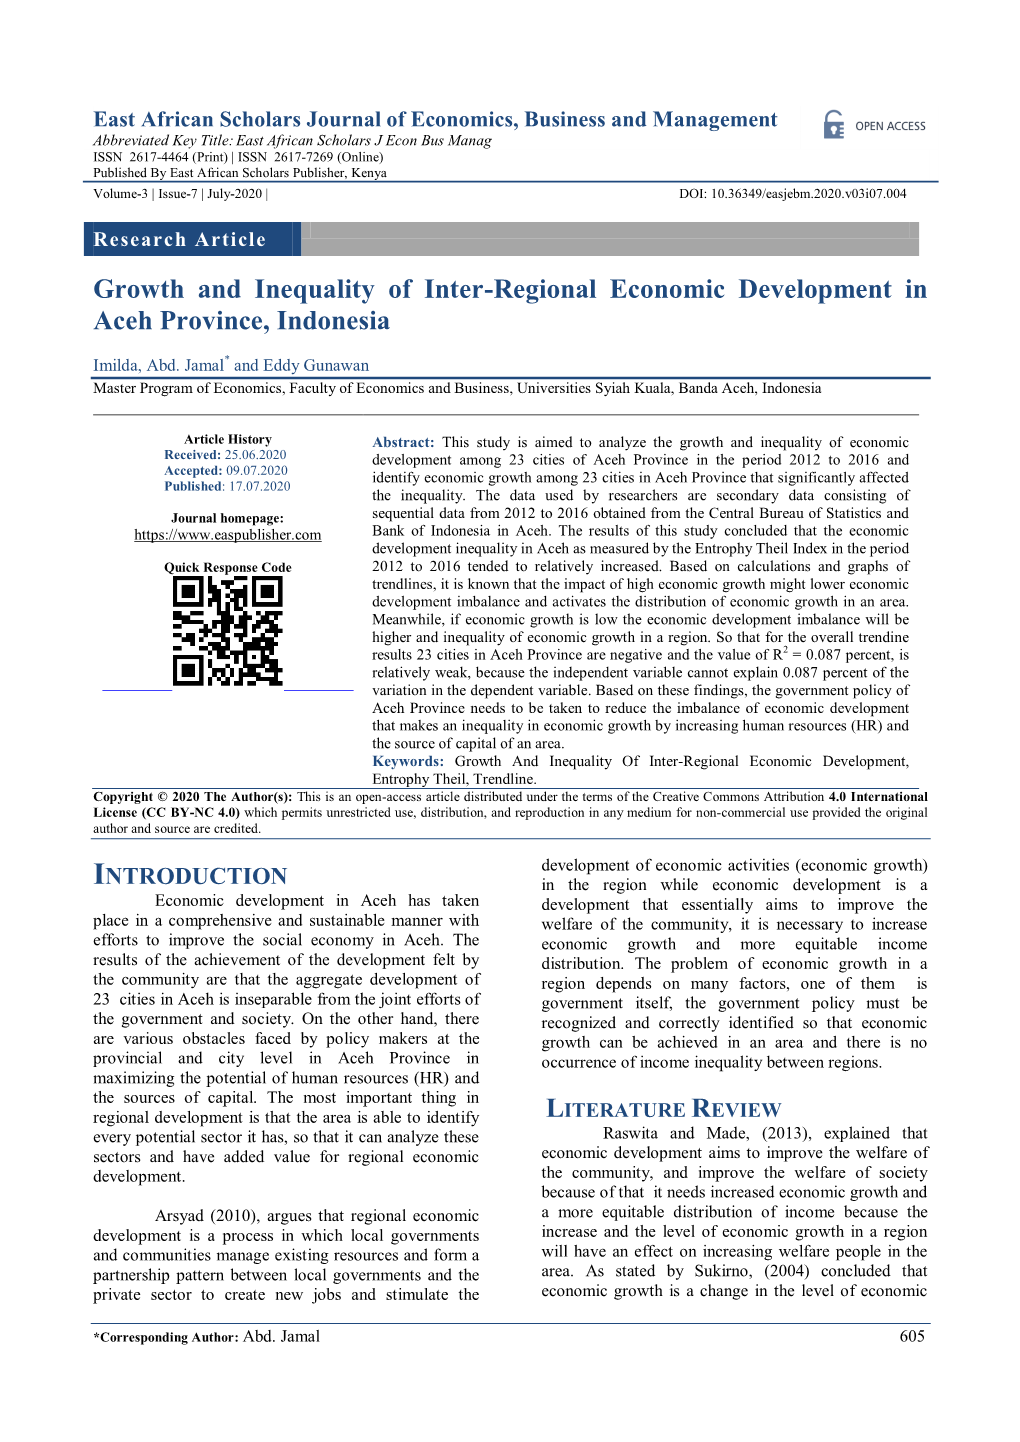 Growth and Inequality of Inter-Regional Economic Development in Aceh Province, Indonesia